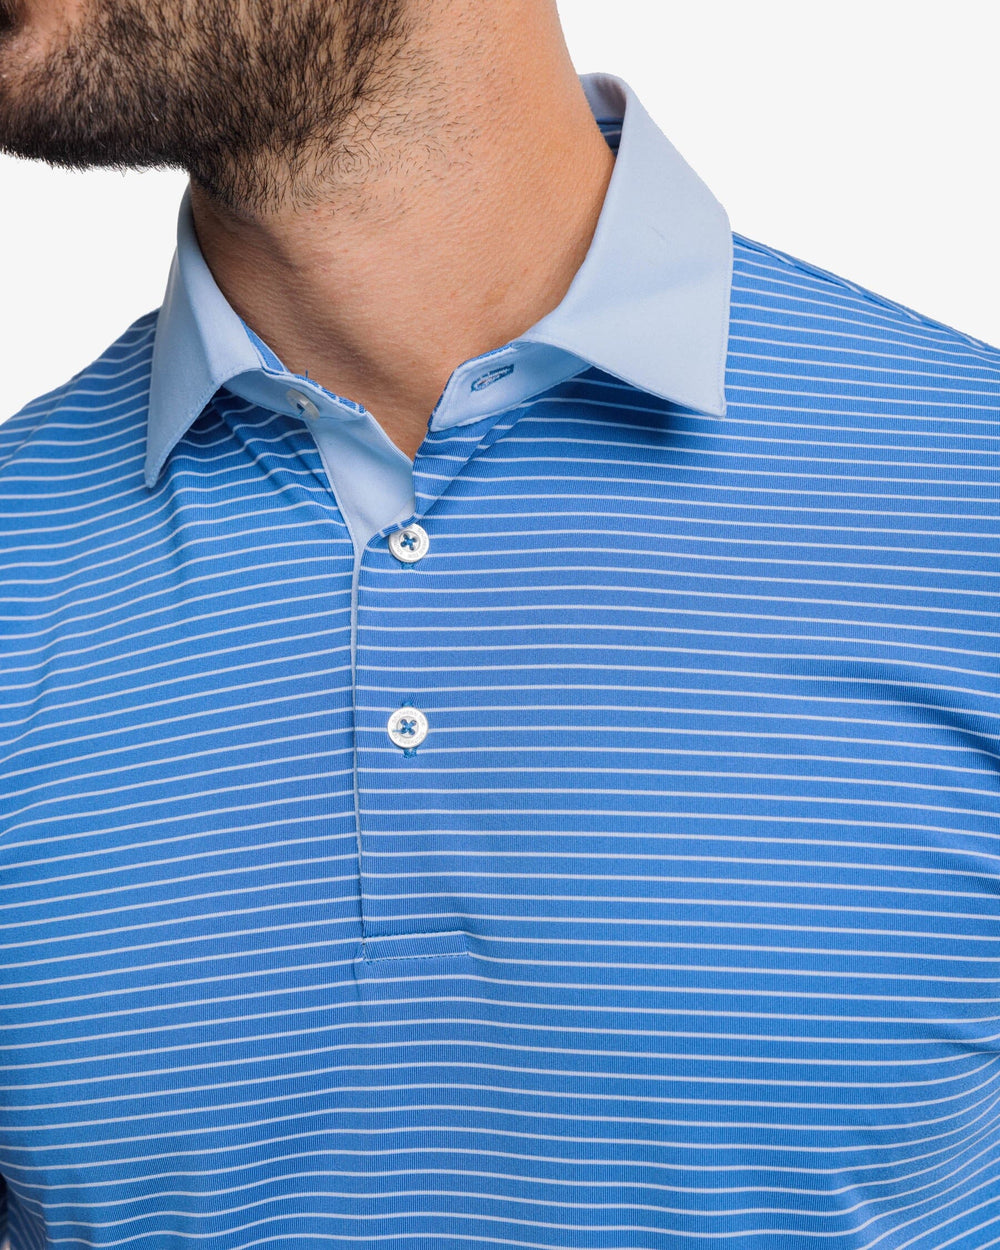 The detail view of the Southern Tide Driver Bowee Stripe Performance Polo Shirt by Southern Tide - Atlantic Blue